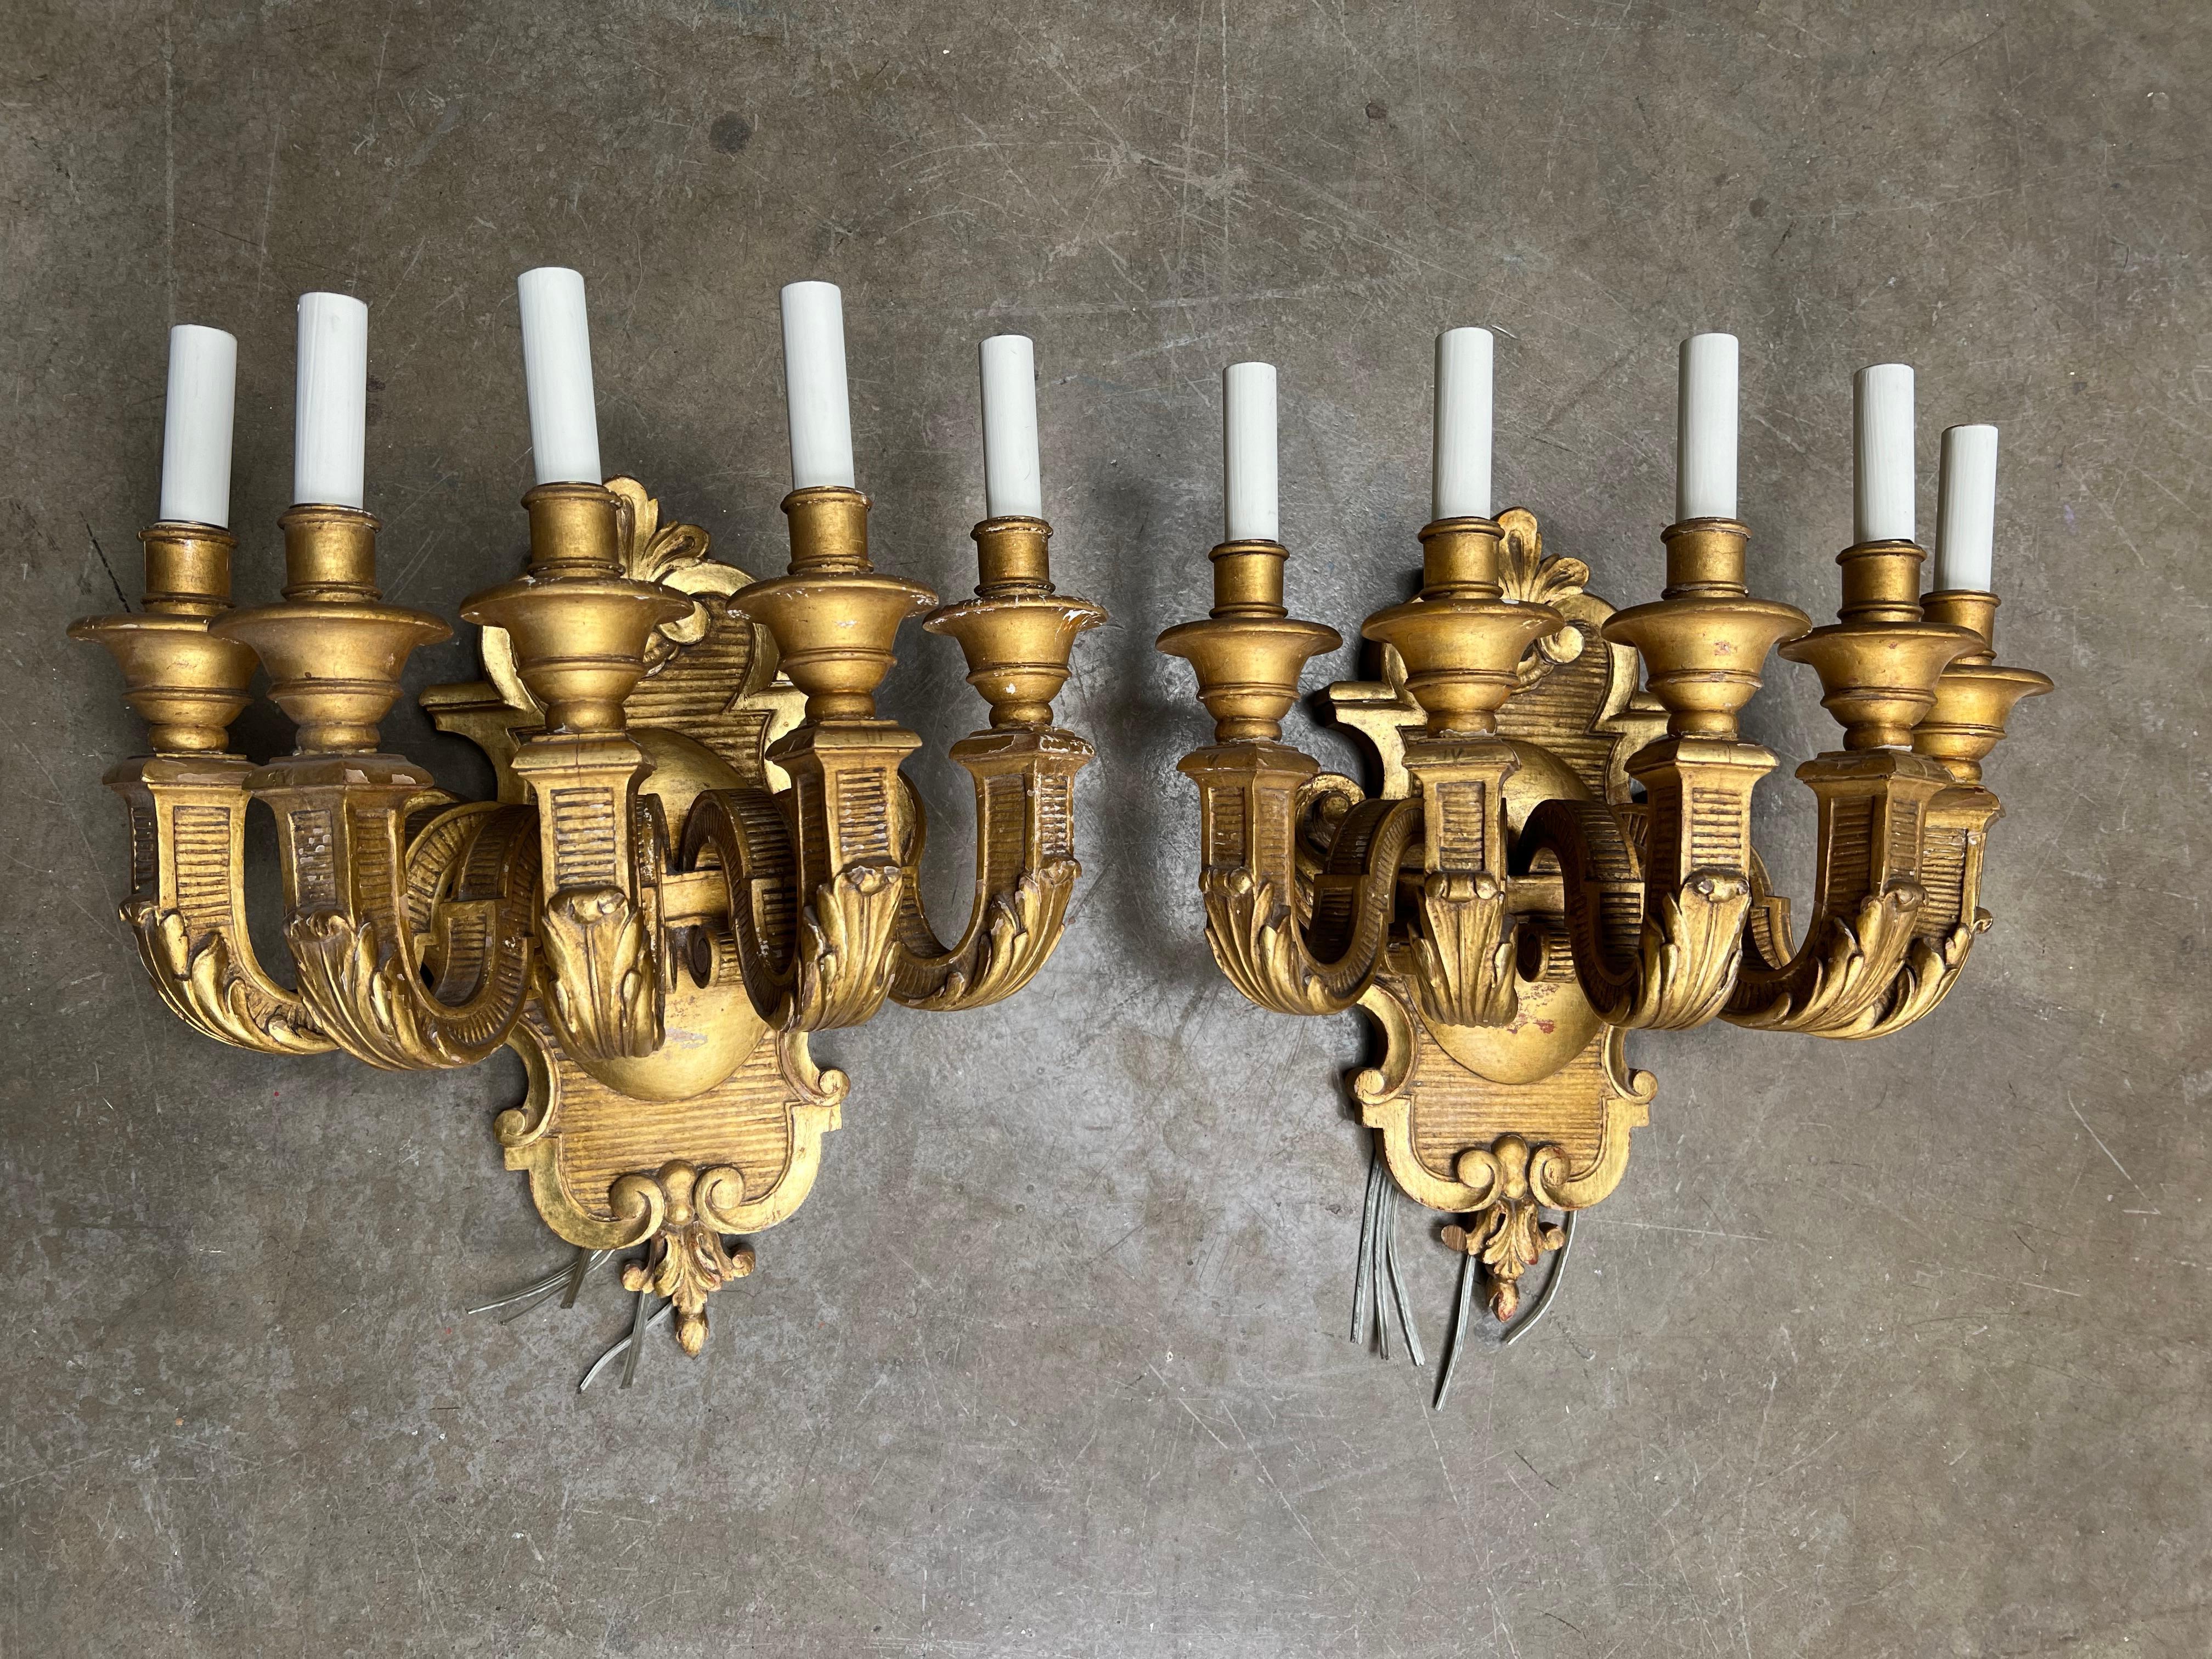 A large pair of French neoclassical style five arm giltwood sconces - wall lights.  These large impressive sconces are currently wired and the height is to the top of the candles.  